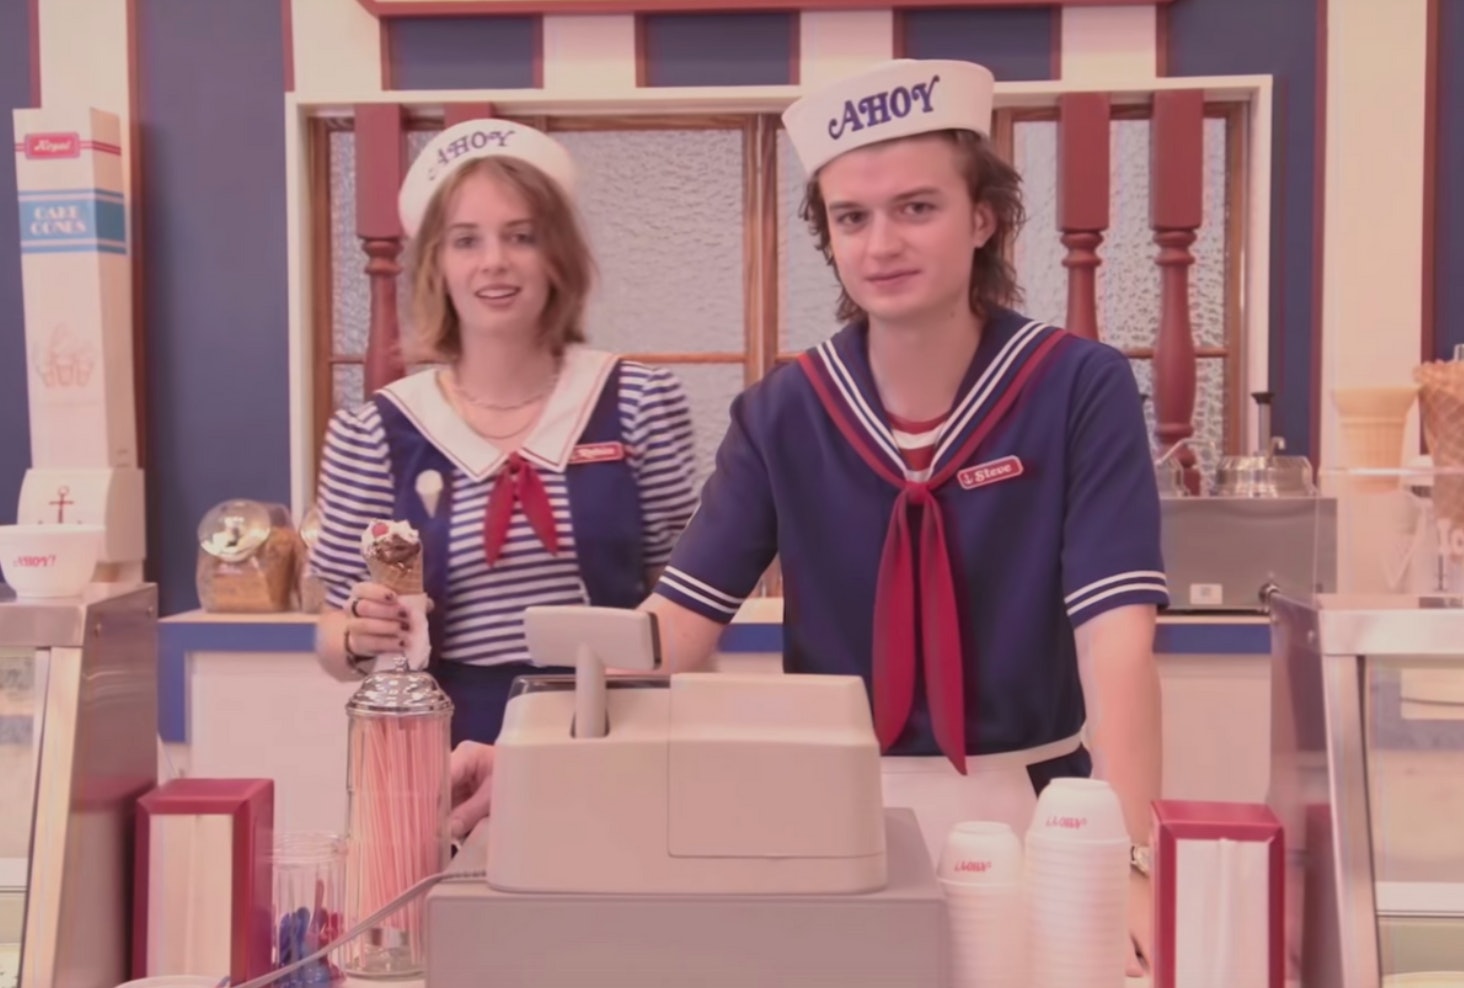 The Stranger Things Scoops Ahoy Outfits Are Perfect For Halloween - Capital